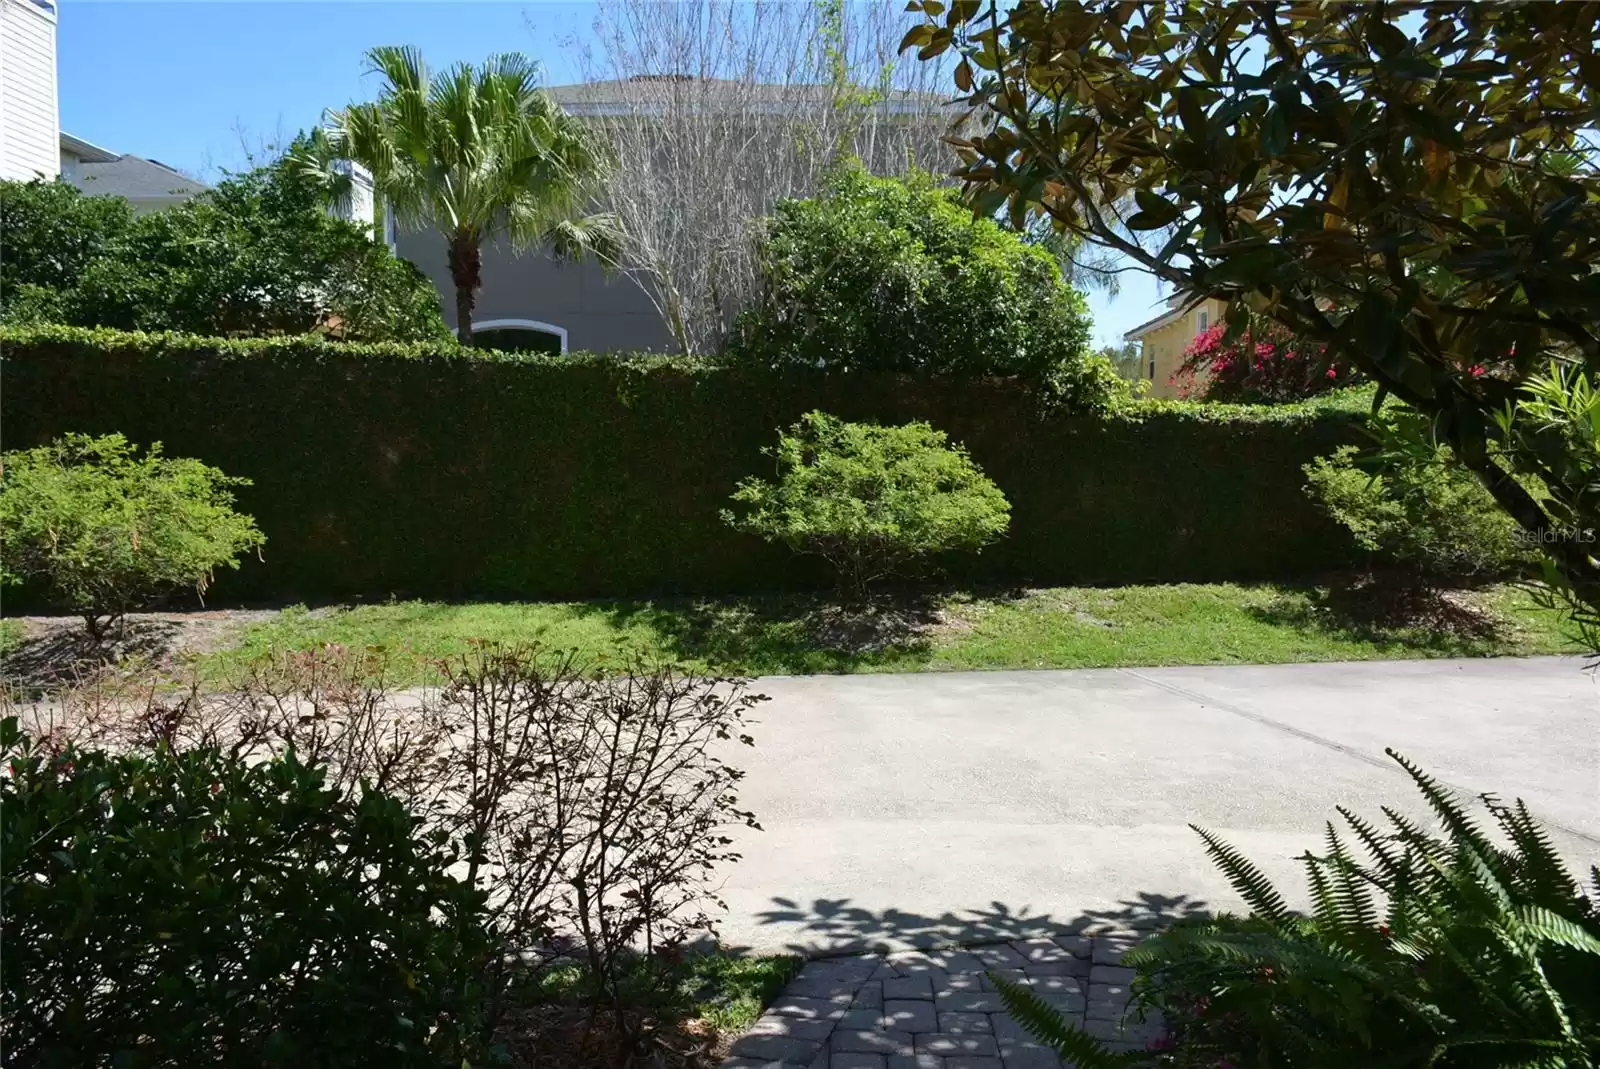 Looking from the front walk to this well manicured community.  Imagine the view once the Crepe Myrtle is blooming!